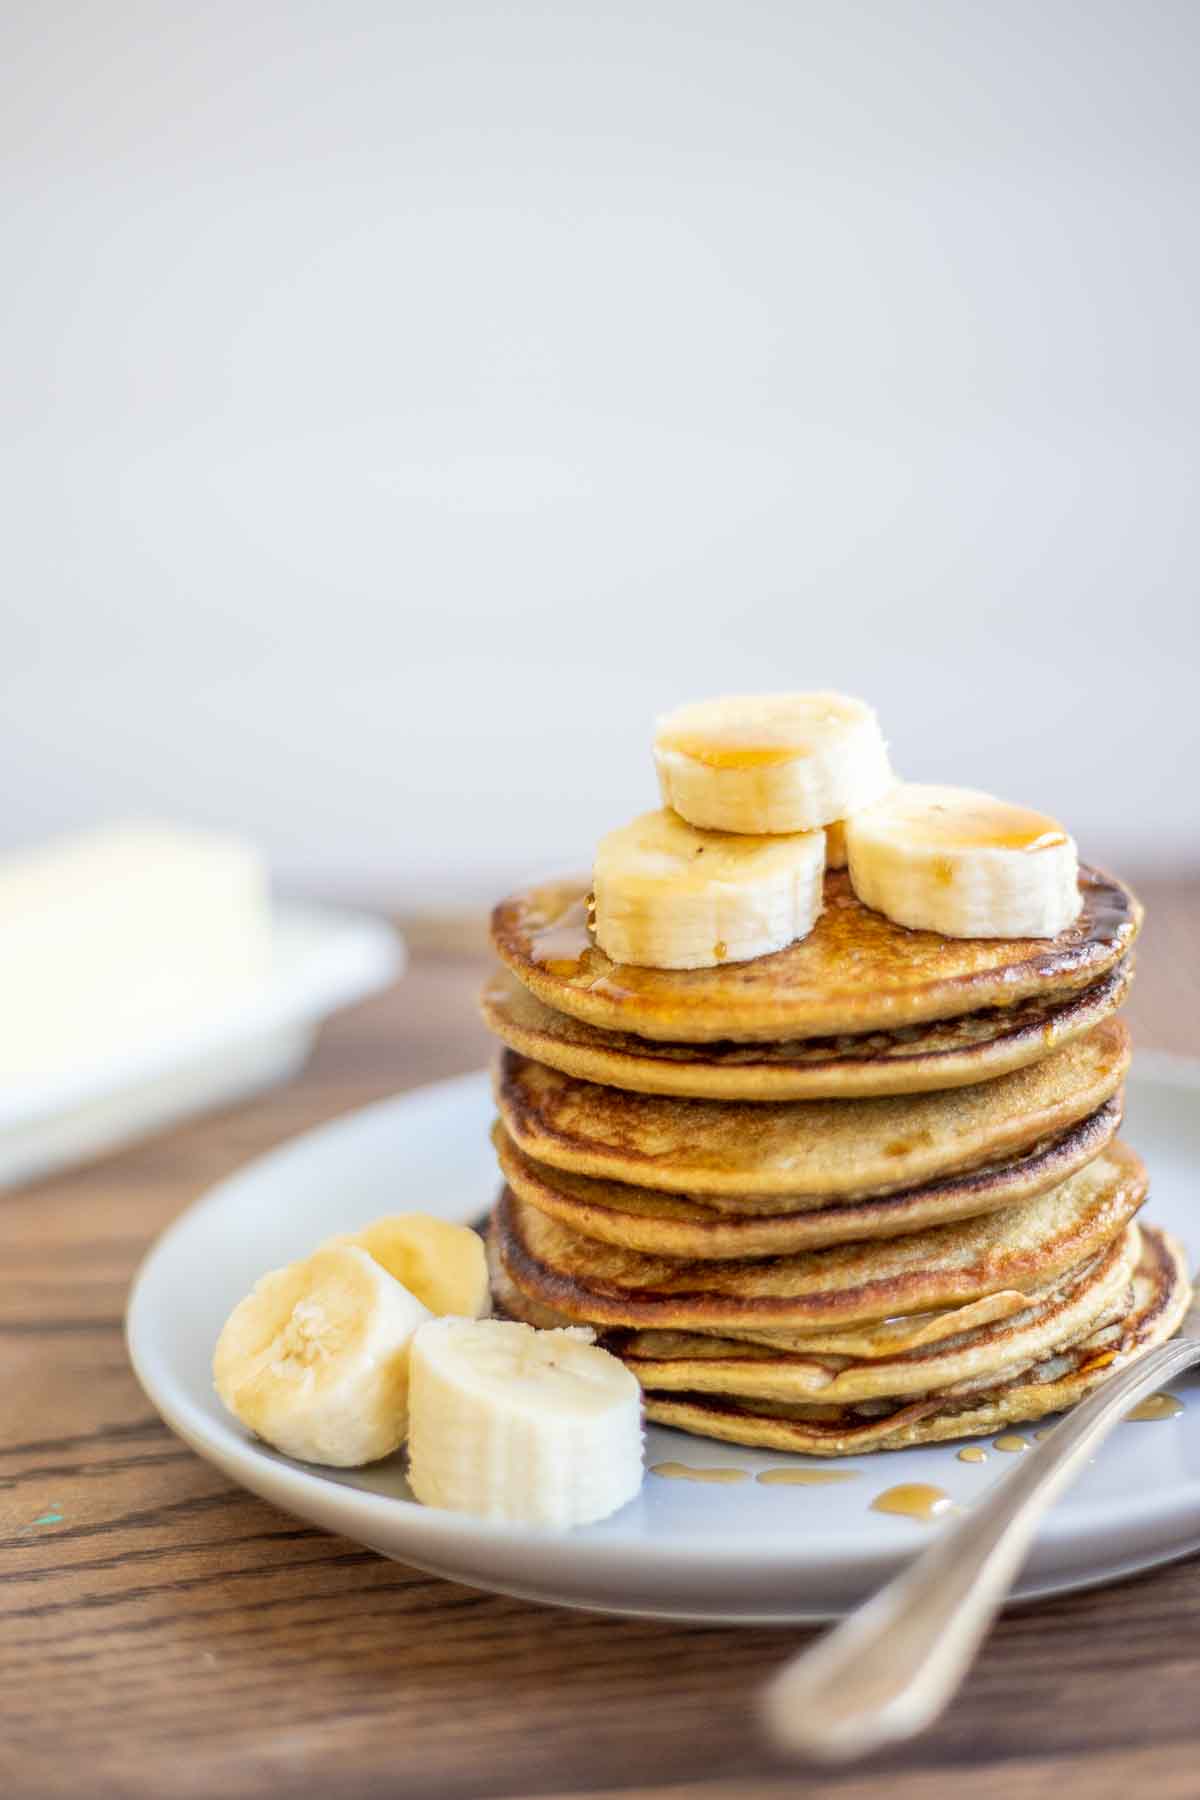 Stack of gluten free high protein banana pancakes with sliced banana on top. Pancakes are on a plate with a fork lying on the right side. There is a stick of butter in the background.